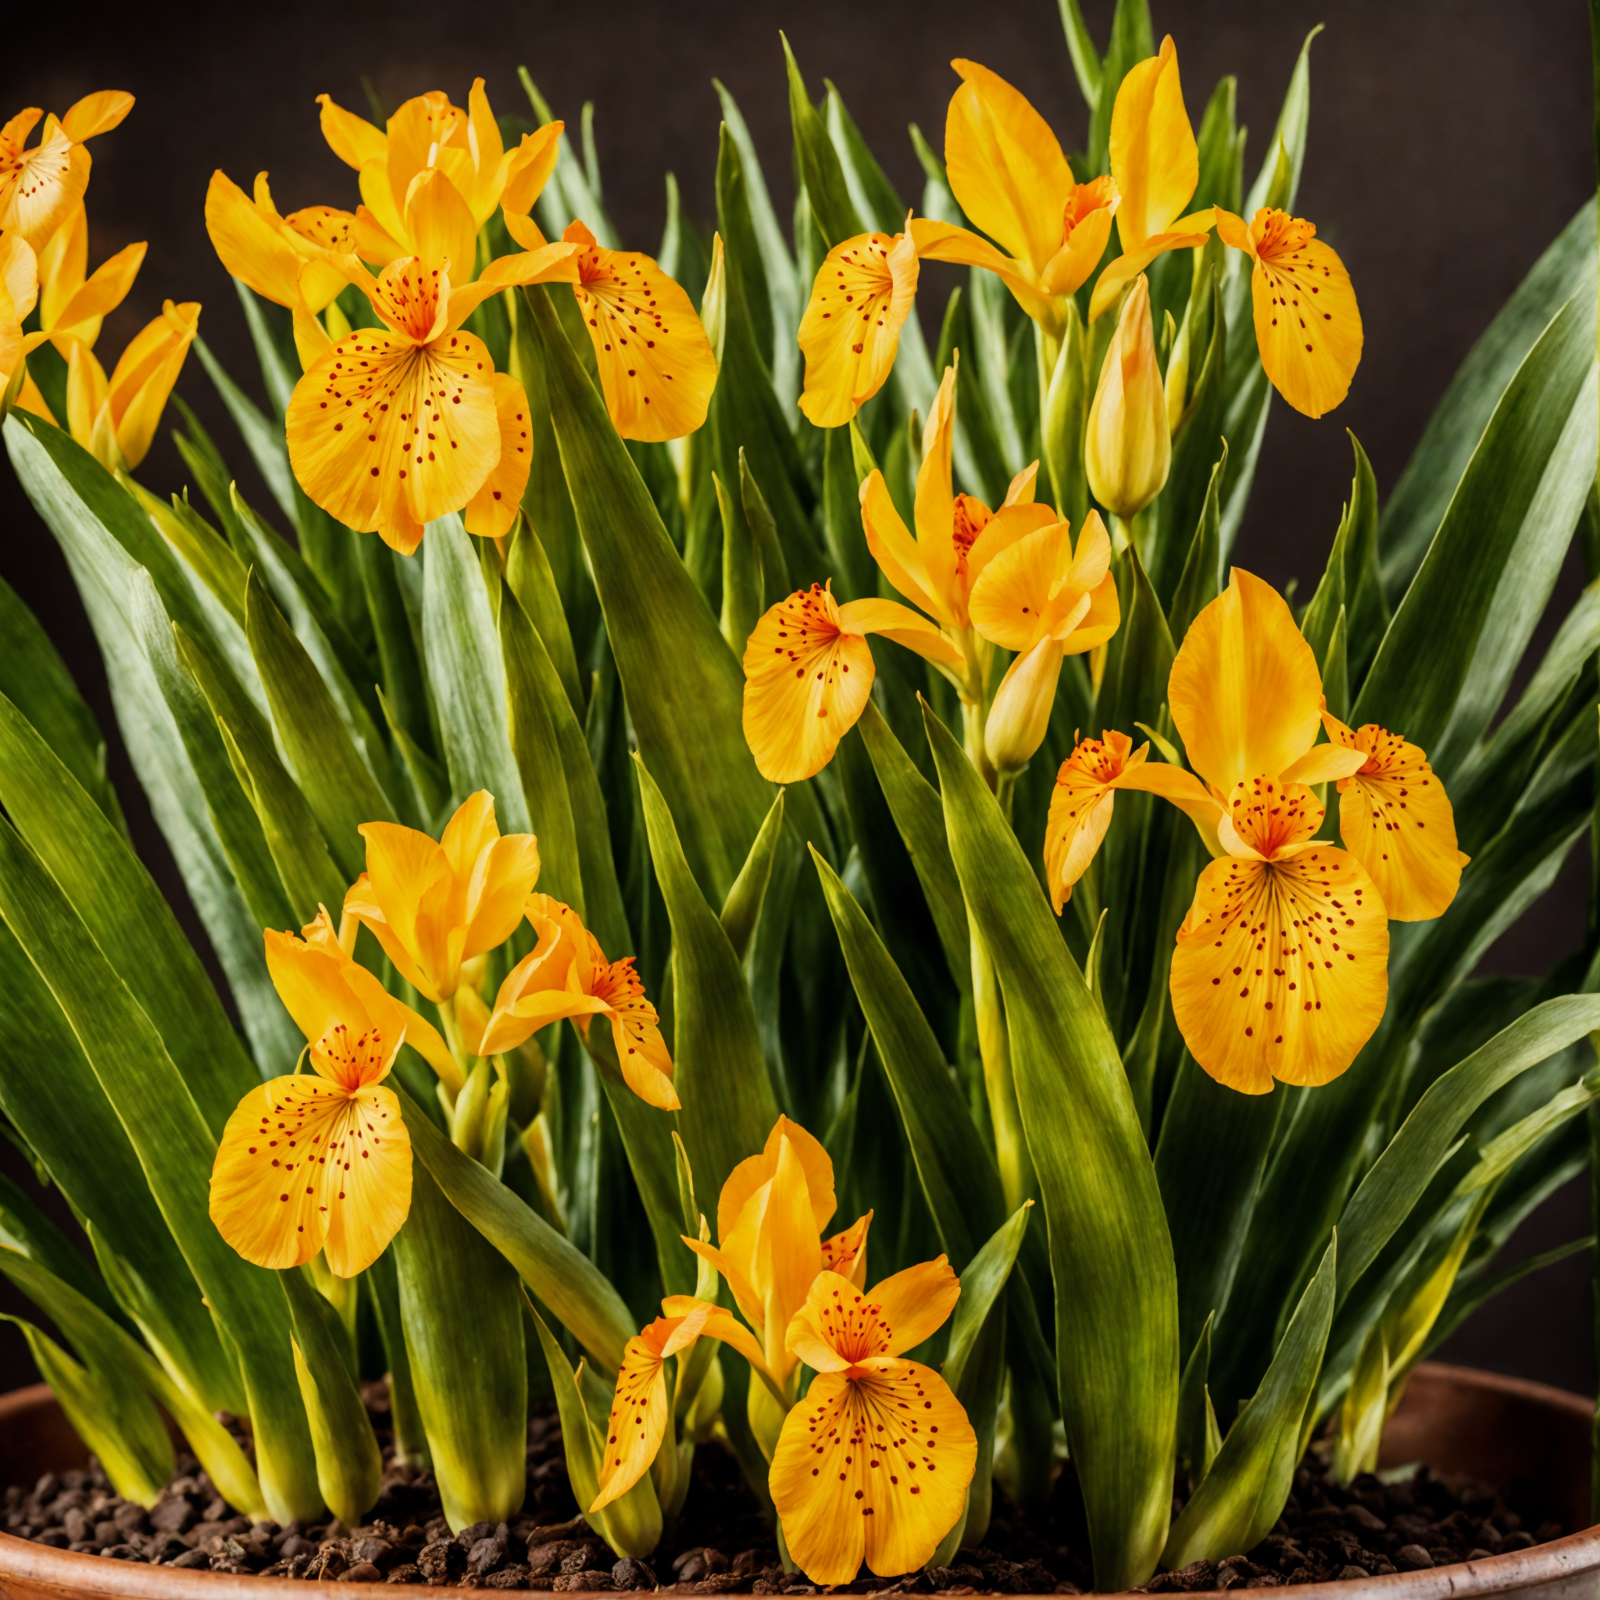 Iris pseudacorus with vibrant yellow flowers in a planter, clear lighting against a dark background.